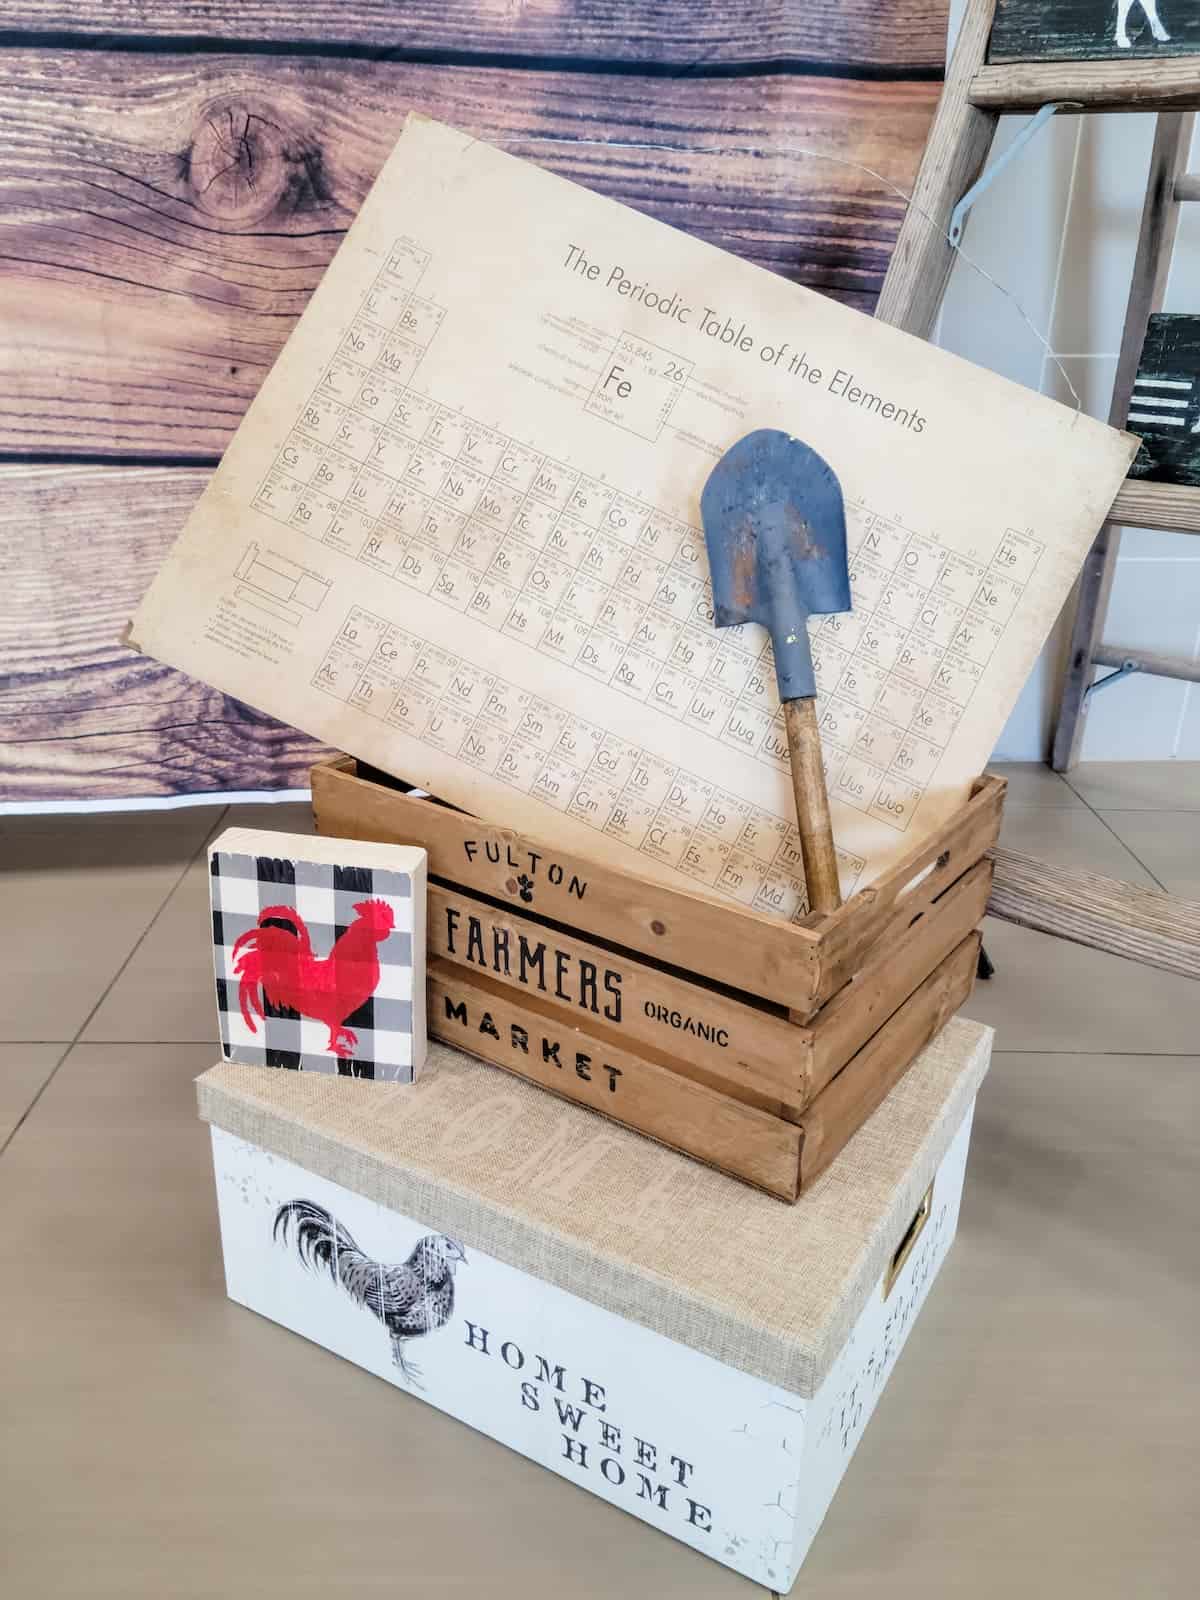 A decorative display with a shovel, periodic table of elements, wooden crate labeled "Farmers Market," a rooster sign, and a white "Home Sweet Home" box.